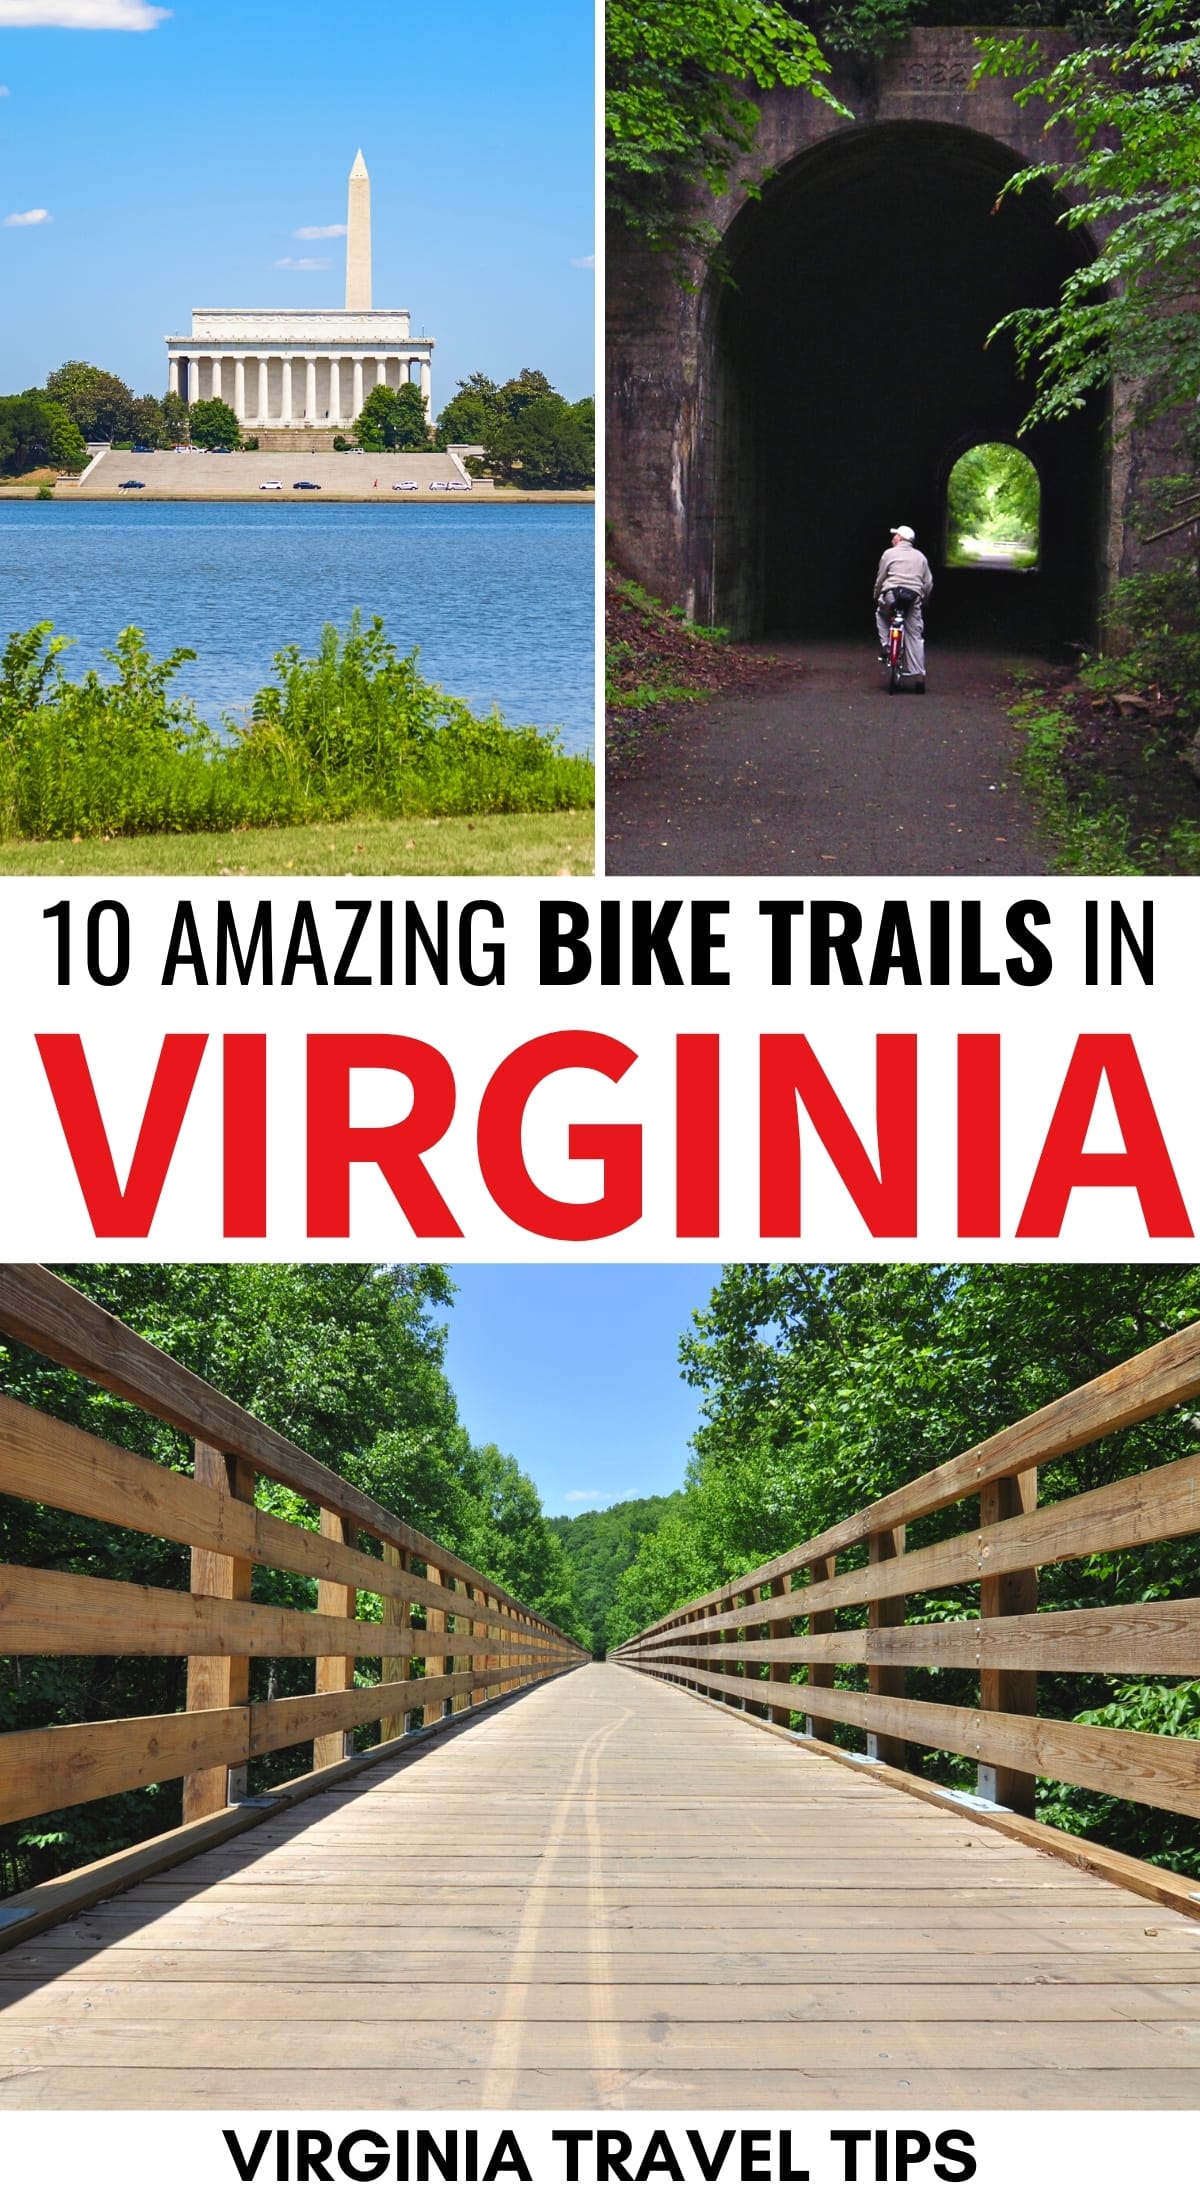 Are you looking for the best Virginia bike trails for an upcoming trip? This guide shows you some of the best bike trails in Virginia and where they are located. | Virginia biking | Virginia trails | Virginia nature | Virginia creeper trail | Mount Vernon Trail | Best of Virginia | Virginia is for lovers | Things to do in Virginia